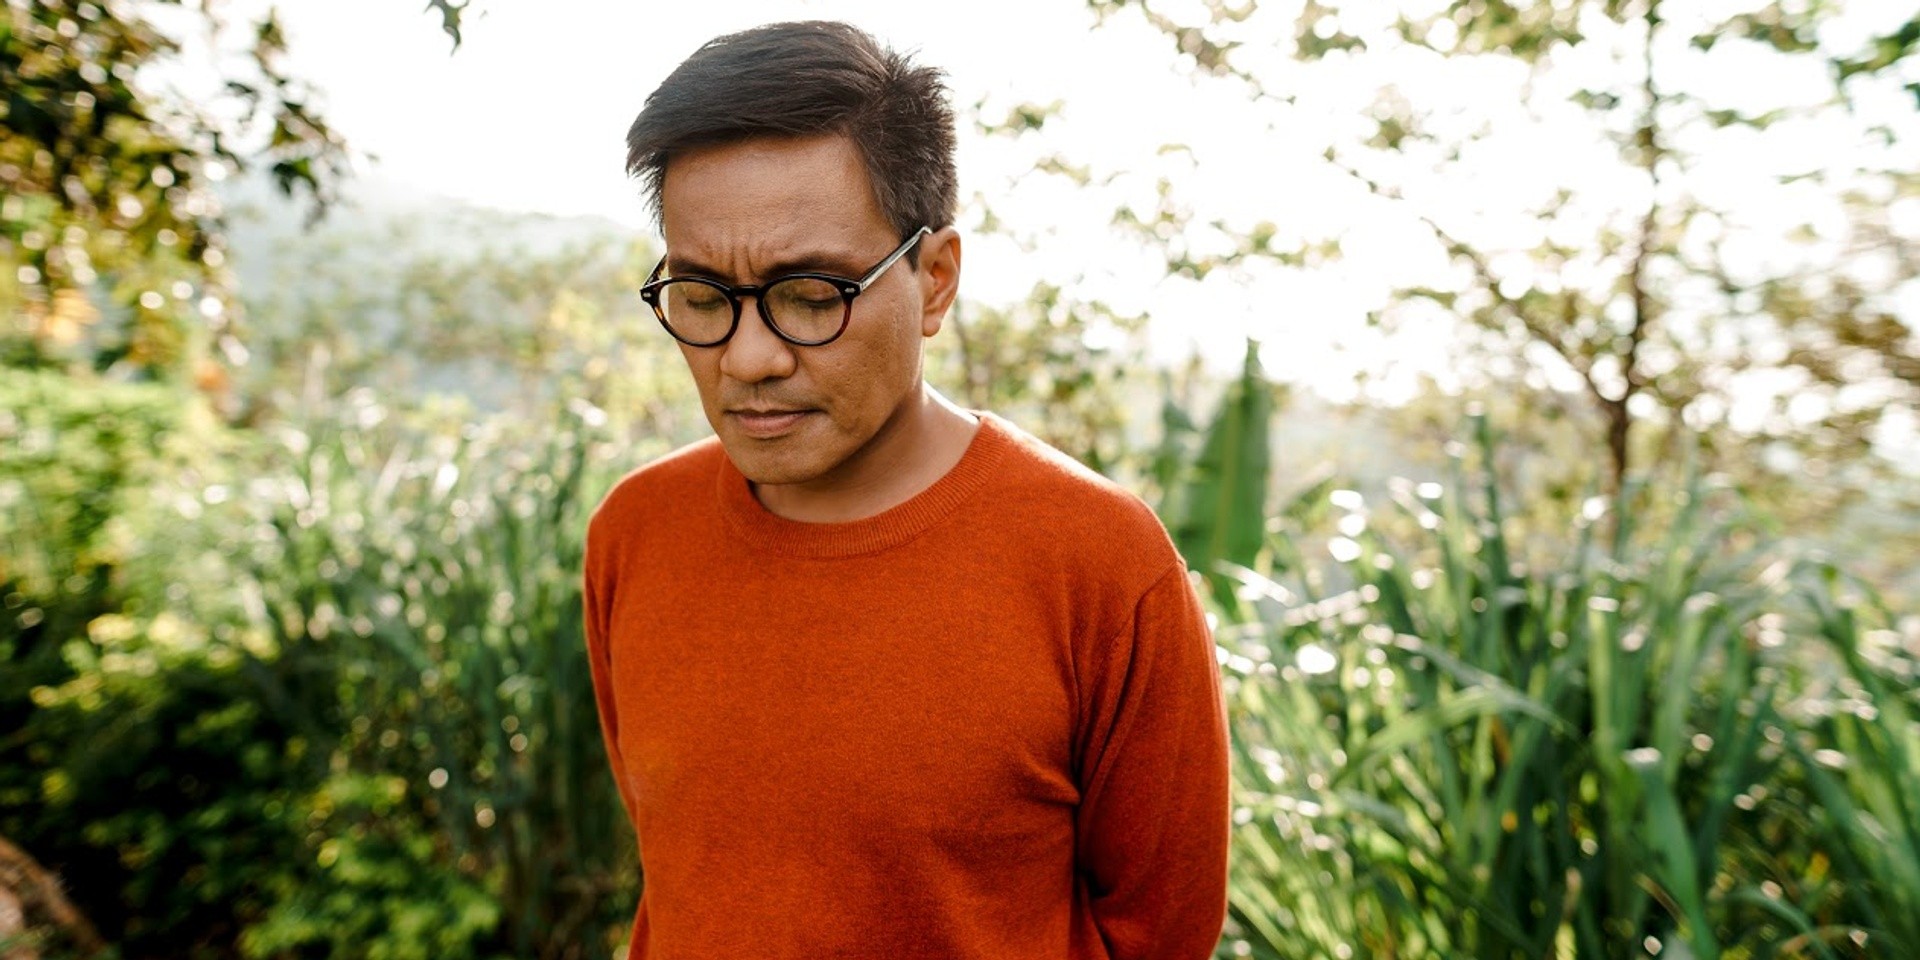 "It's a challenge. It's a mystery to solve": Ebe Dancel talks overcoming struggles with mental health